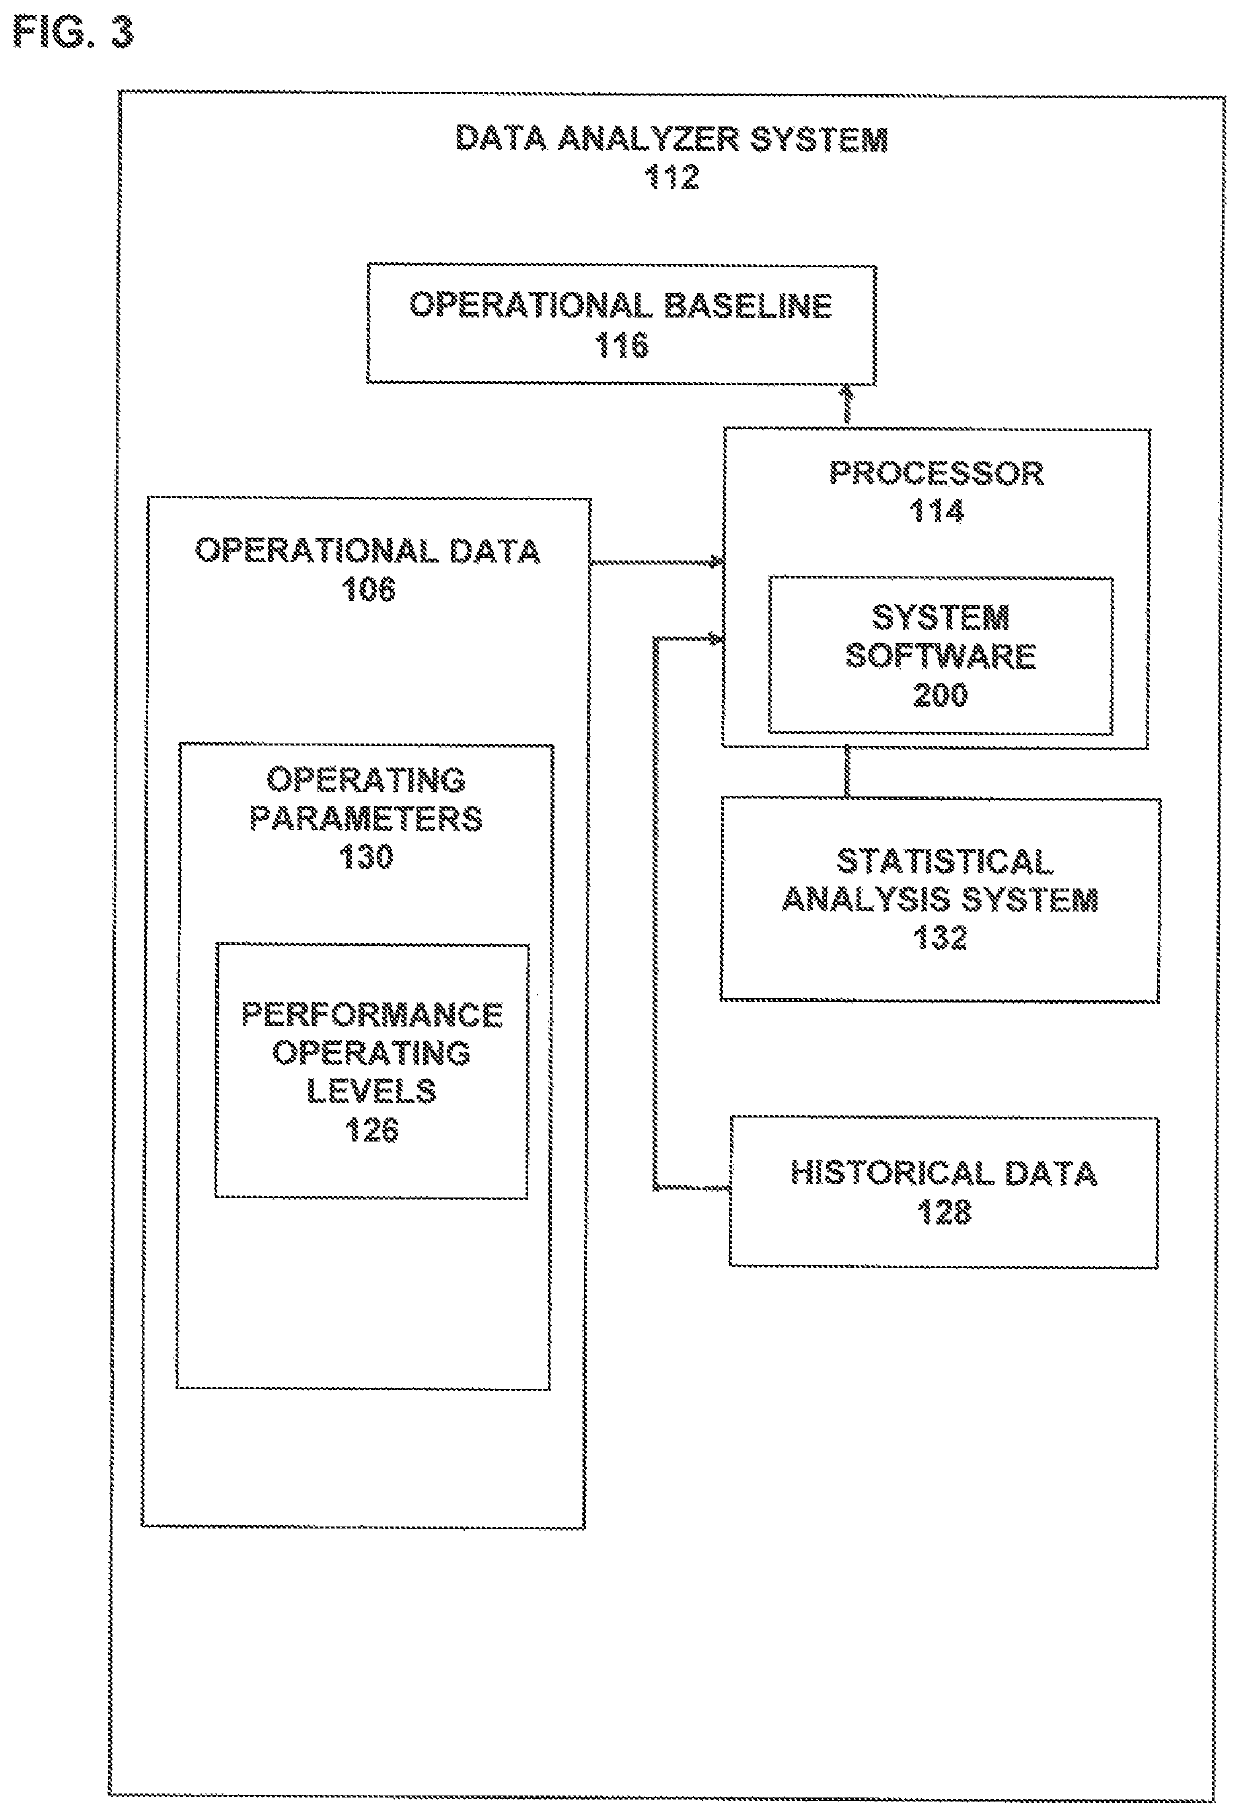 Monitoring system for use in industrial operations